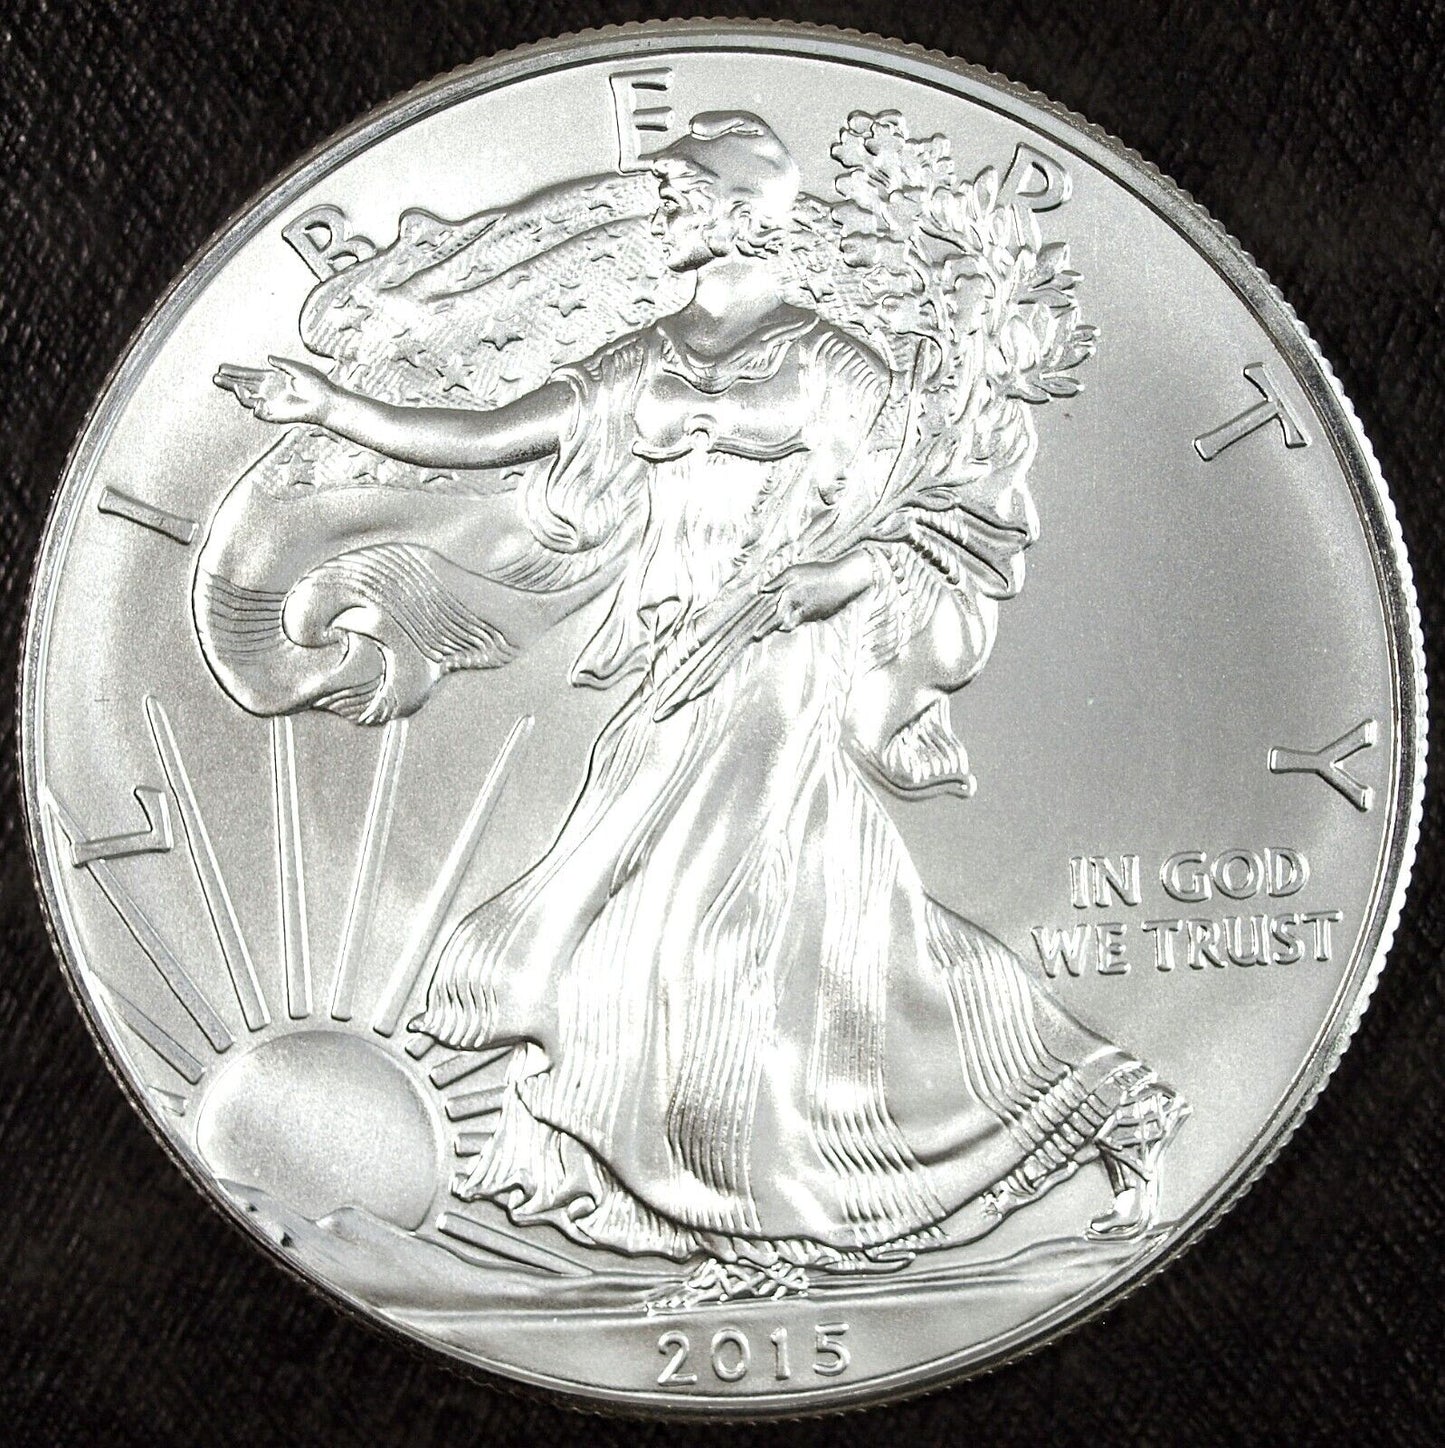 2015 U.S. Mint American Silver Eagle ☆☆ Uncirculated ☆☆ Great Collectible 112